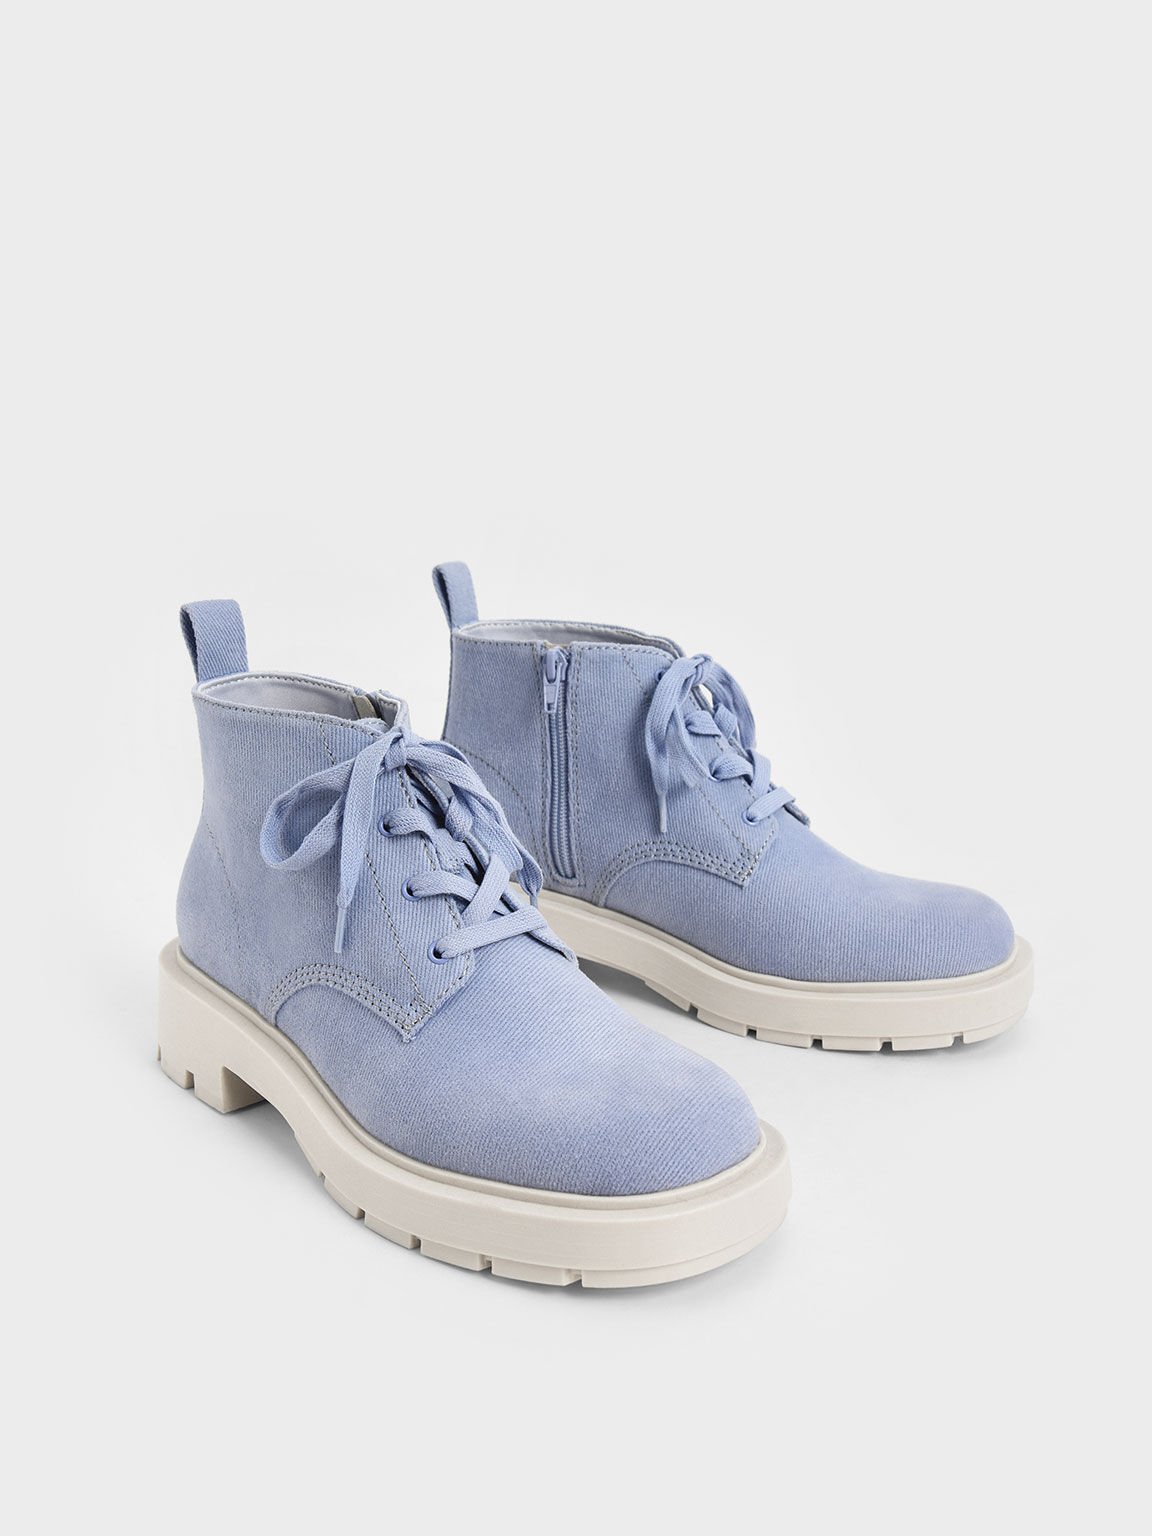 Twill Lace-Up Ankle Boots, Light Blue, hi-res